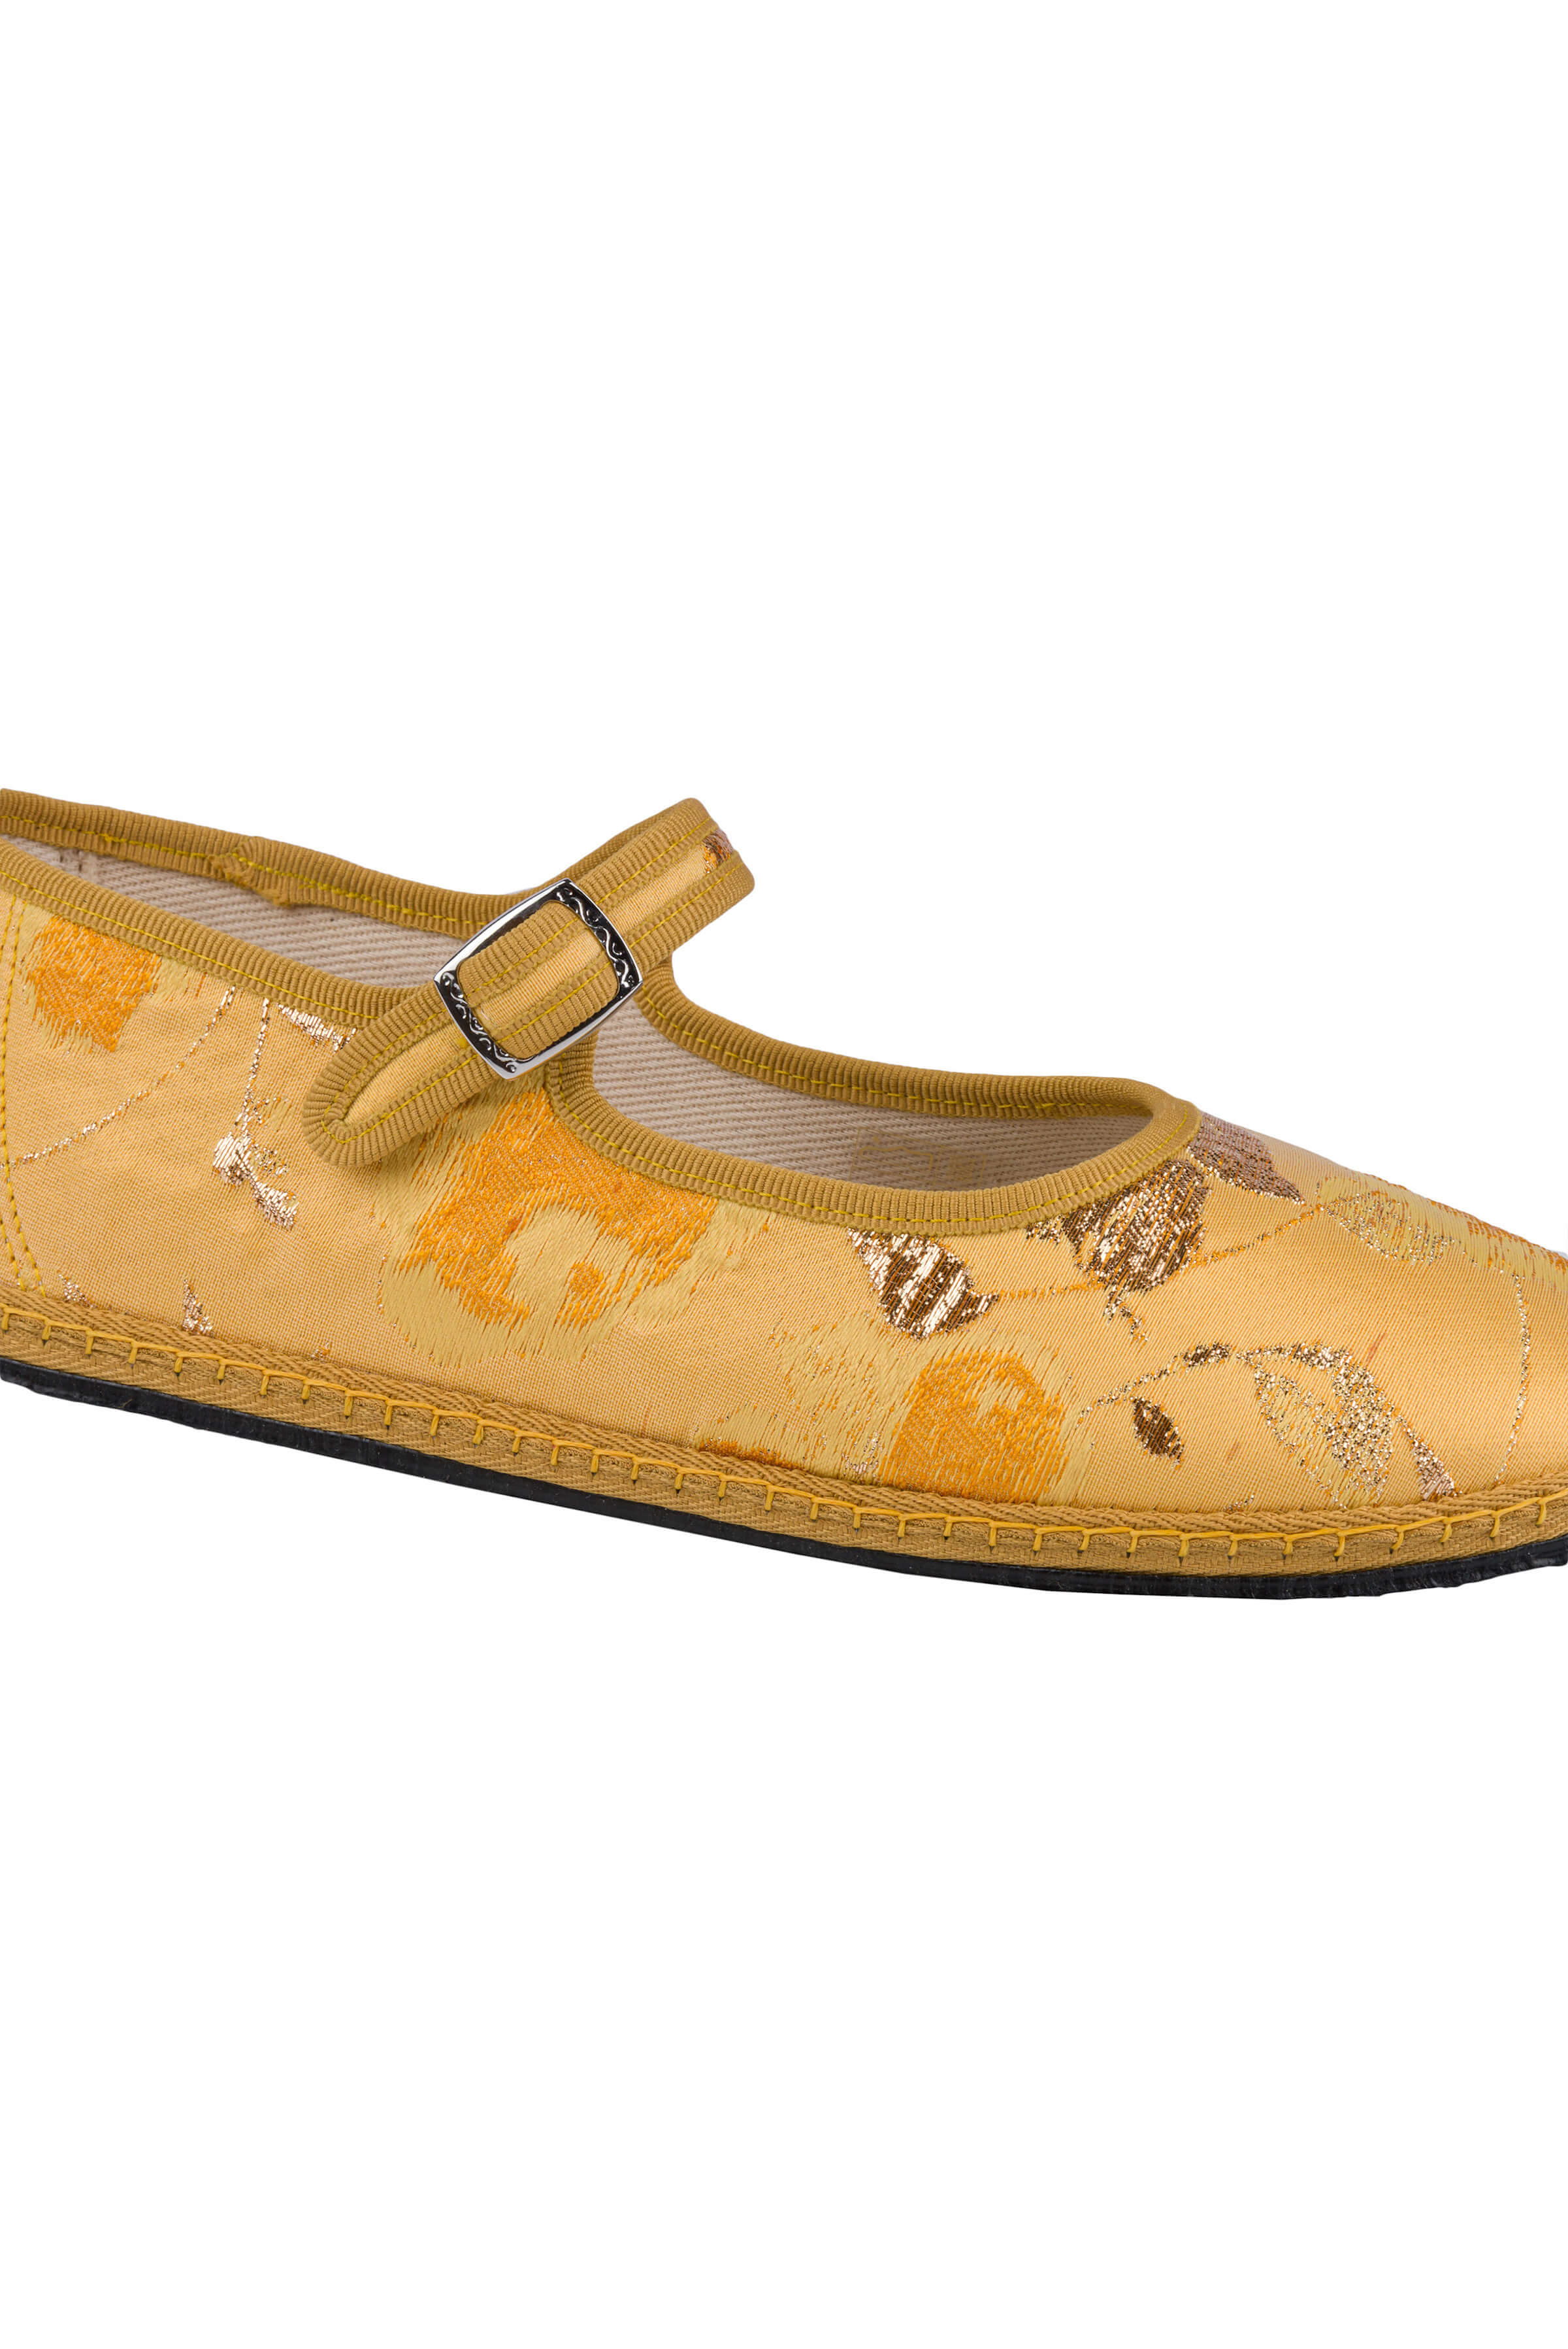 Lola Gold Floral Brocade Mary Jane